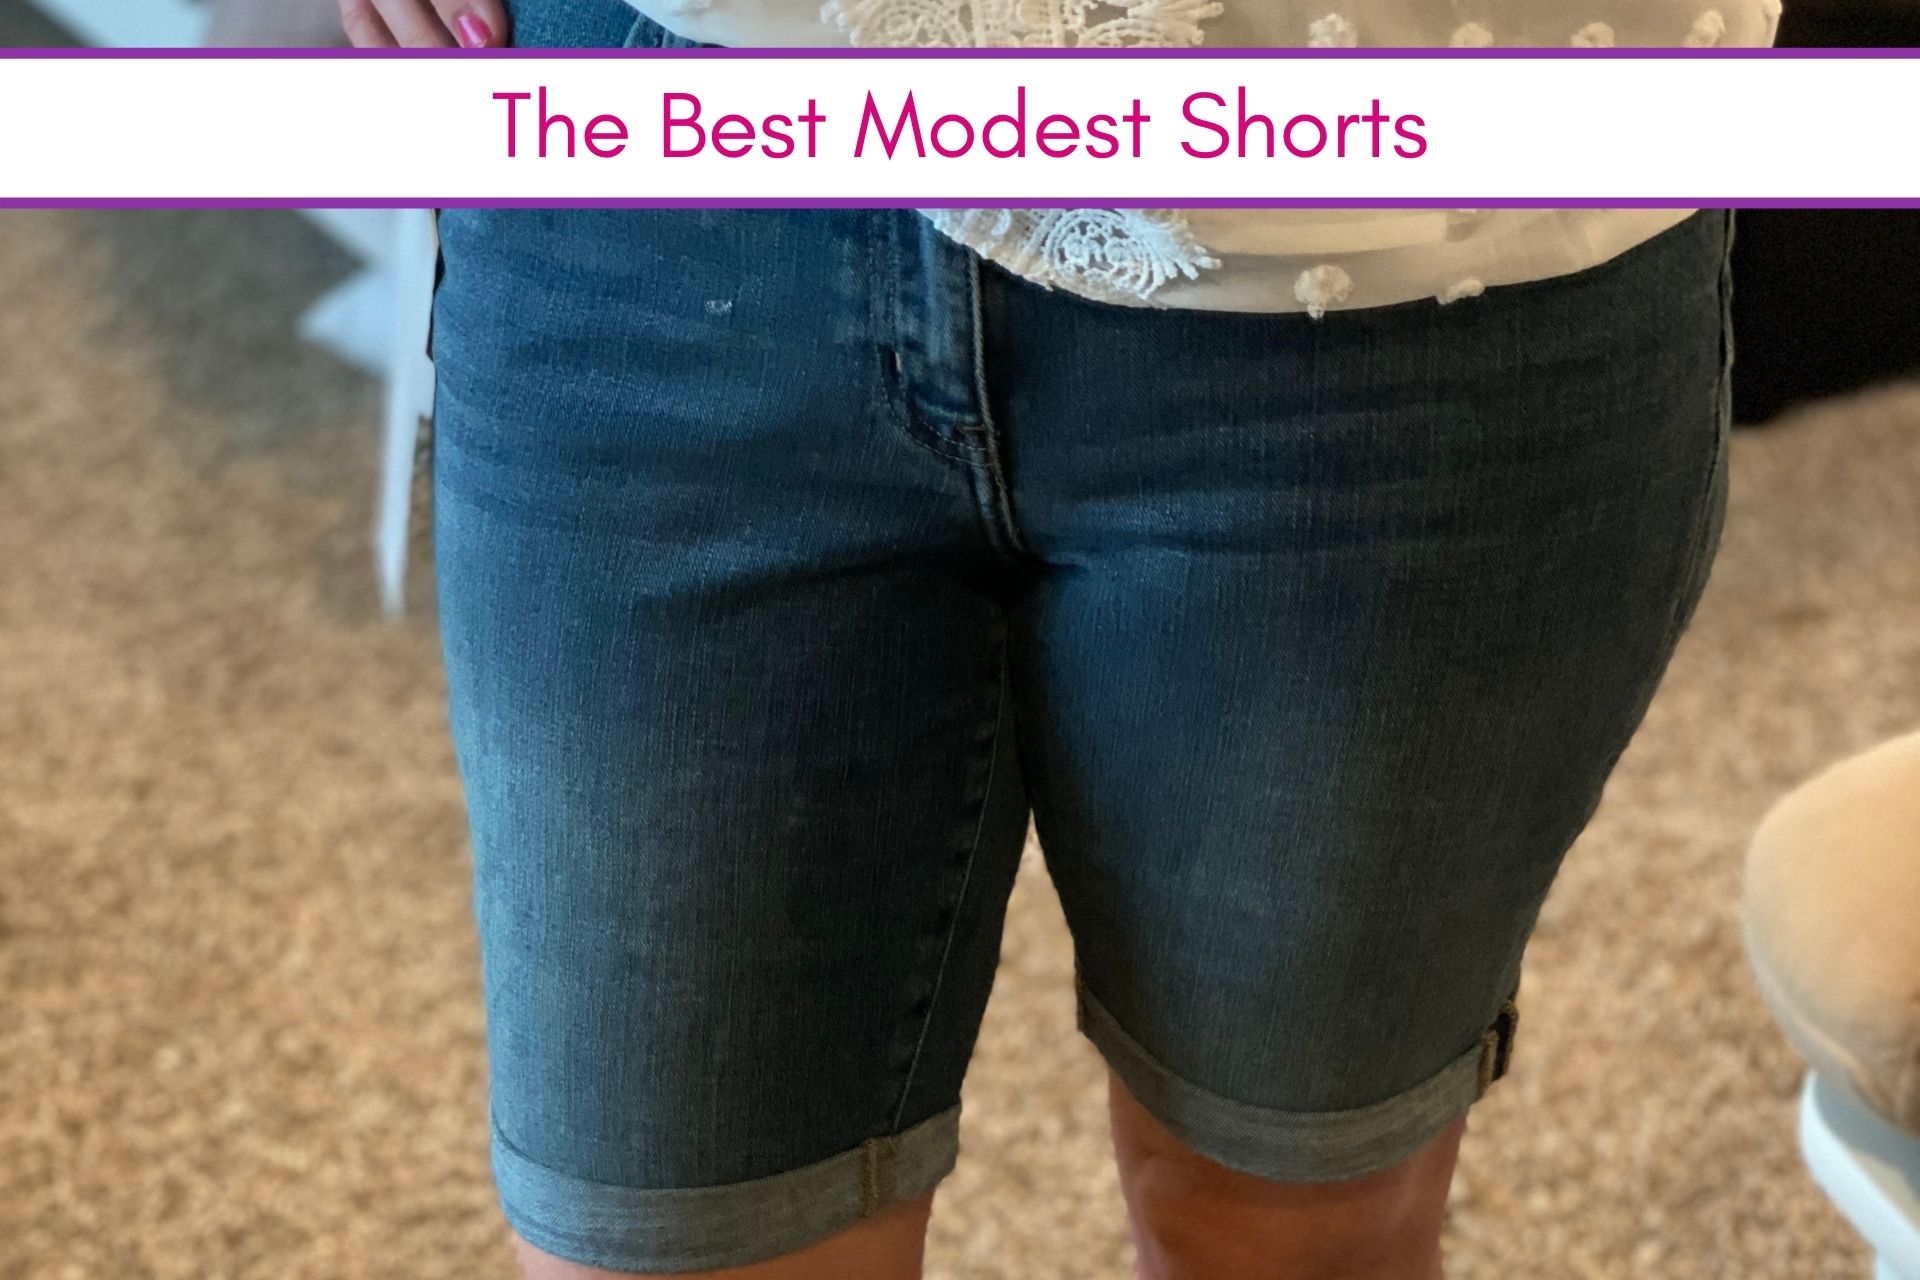 The Best Modest Shorts in 2021